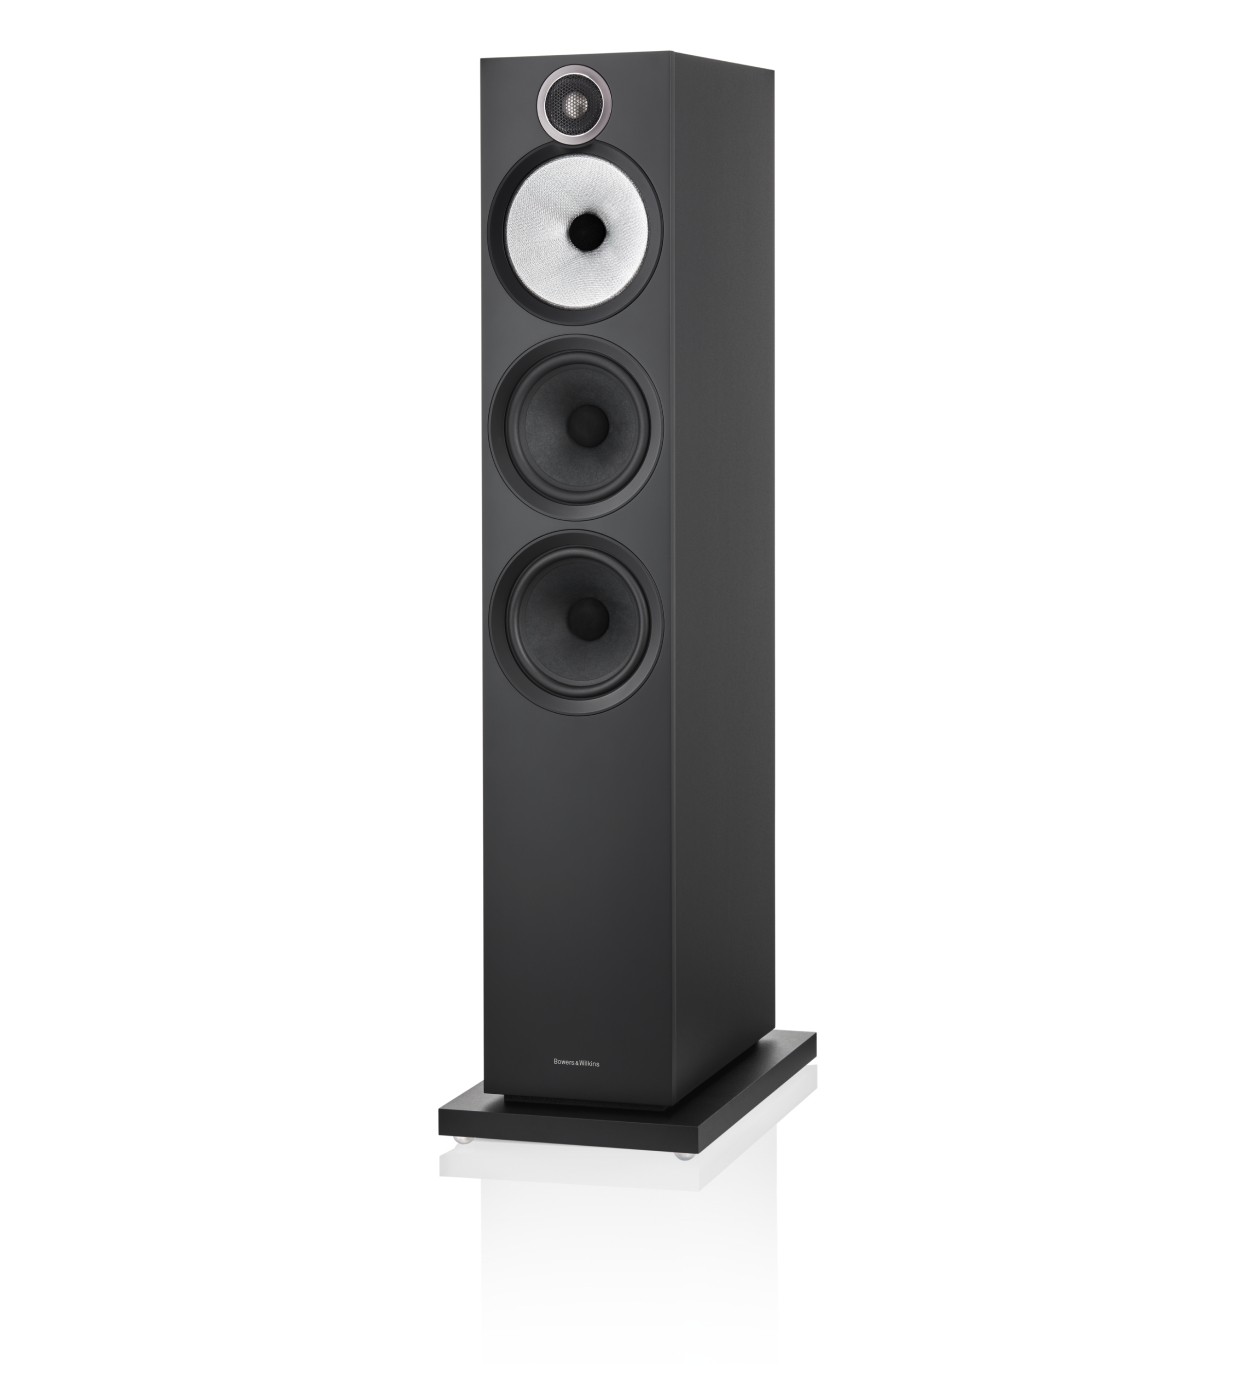 Bowers & Wilkins 606 S3 Bookshelf Speakers Review: Classic and